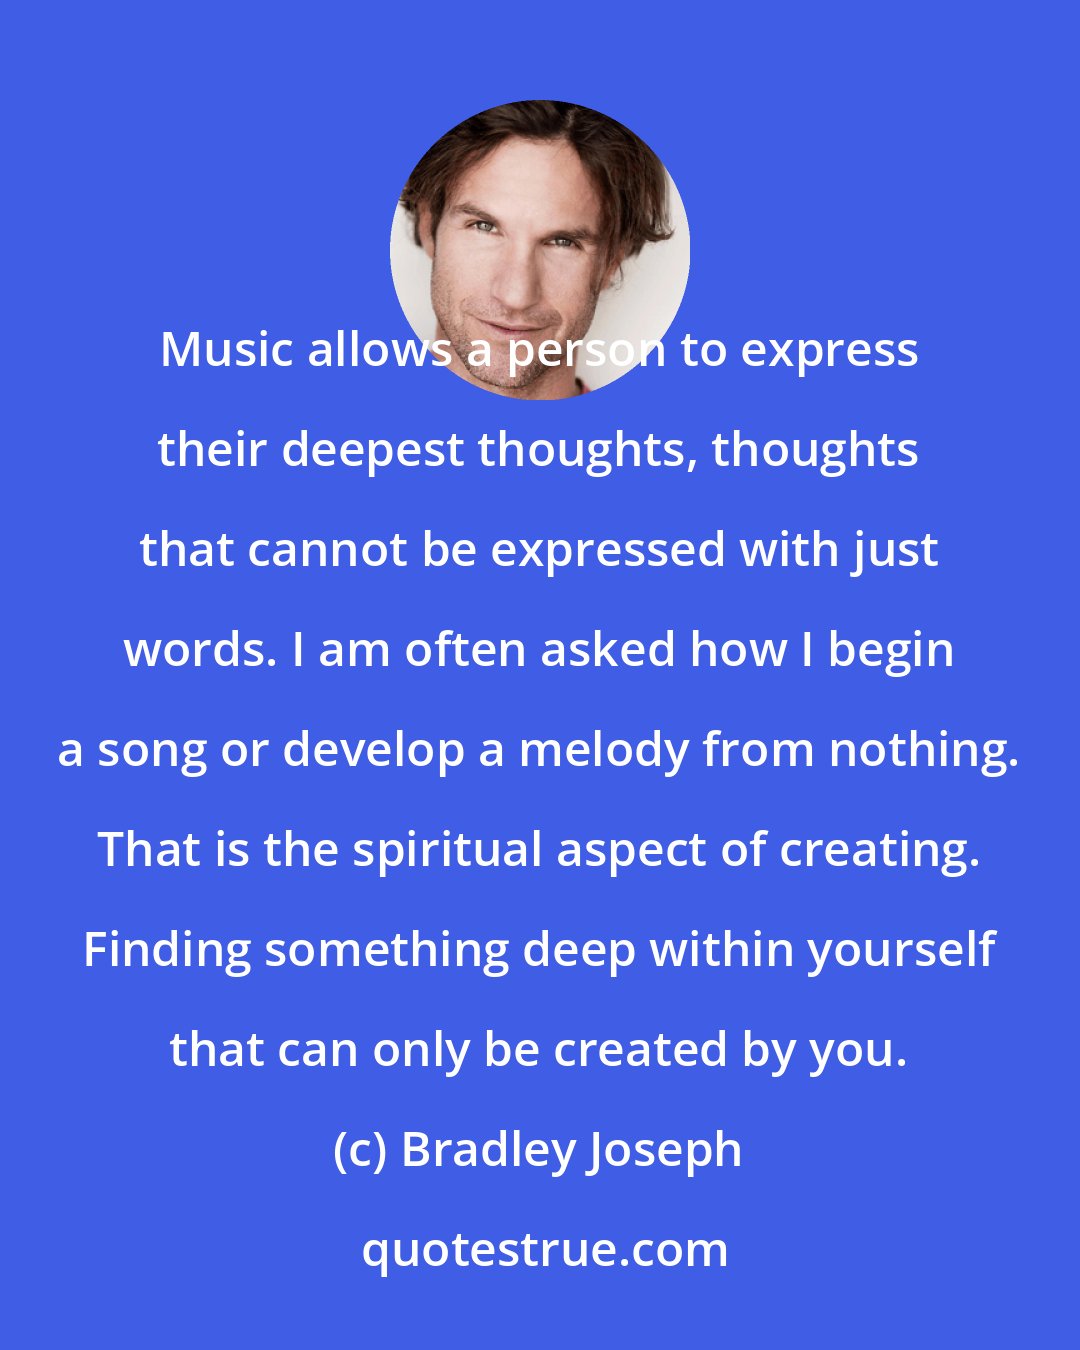 Bradley Joseph: Music allows a person to express their deepest thoughts, thoughts that cannot be expressed with just words. I am often asked how I begin a song or develop a melody from nothing. That is the spiritual aspect of creating. Finding something deep within yourself that can only be created by you.